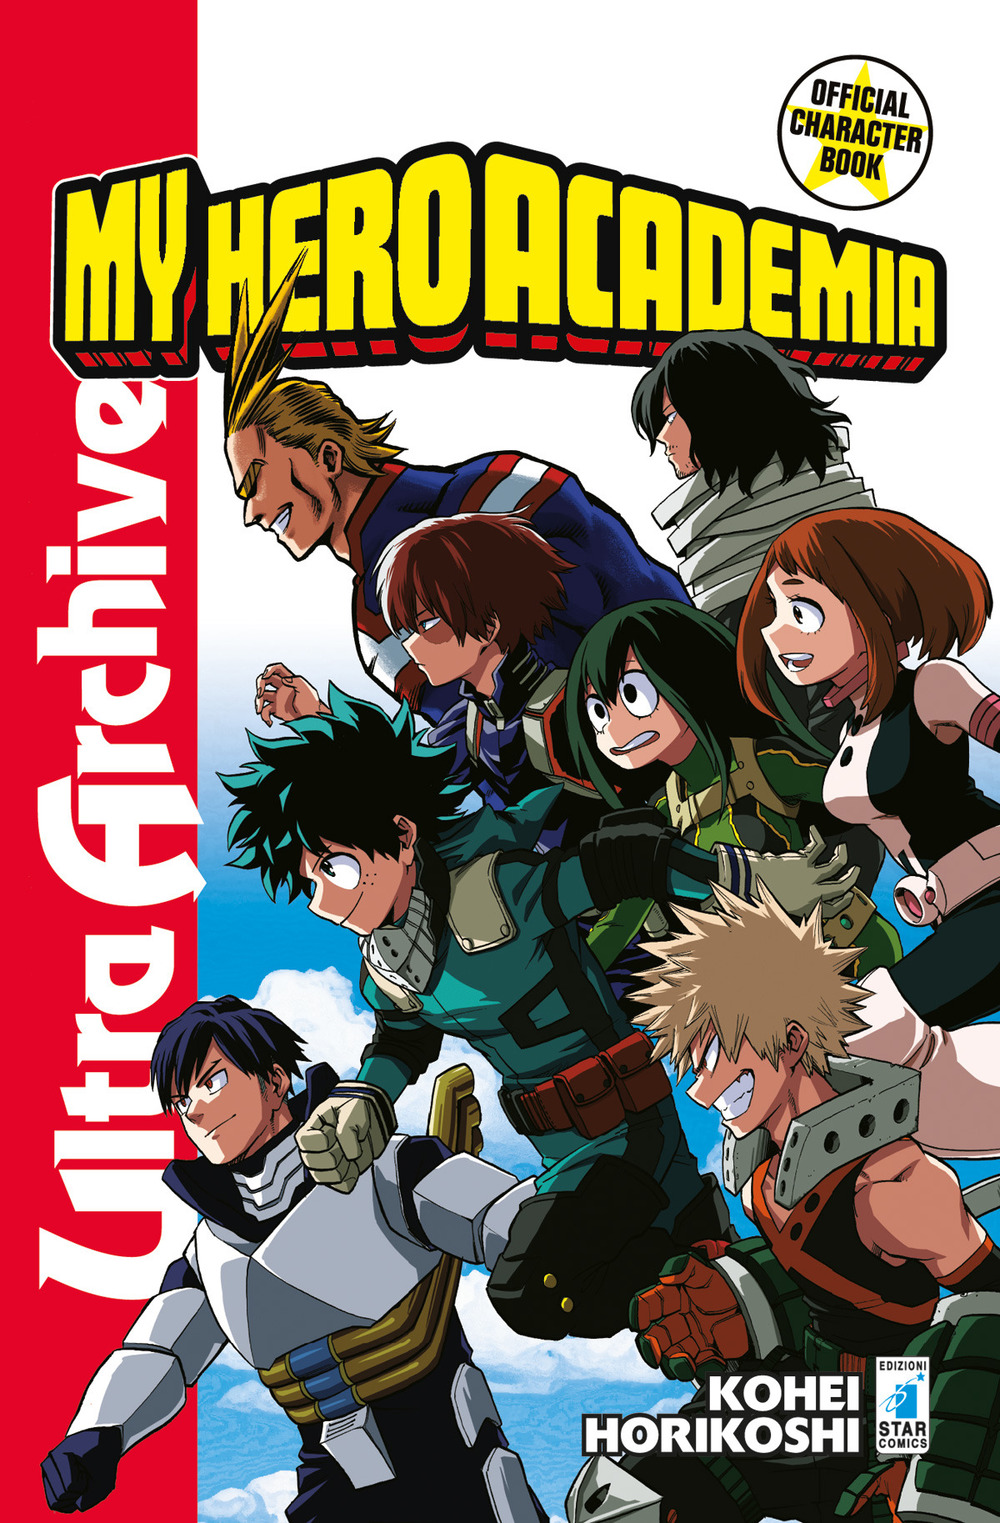 MY HERO ACADEMIA OFFICIAL CHARACTER BOOK ULTRA ARCHIVE VOL. UNICO